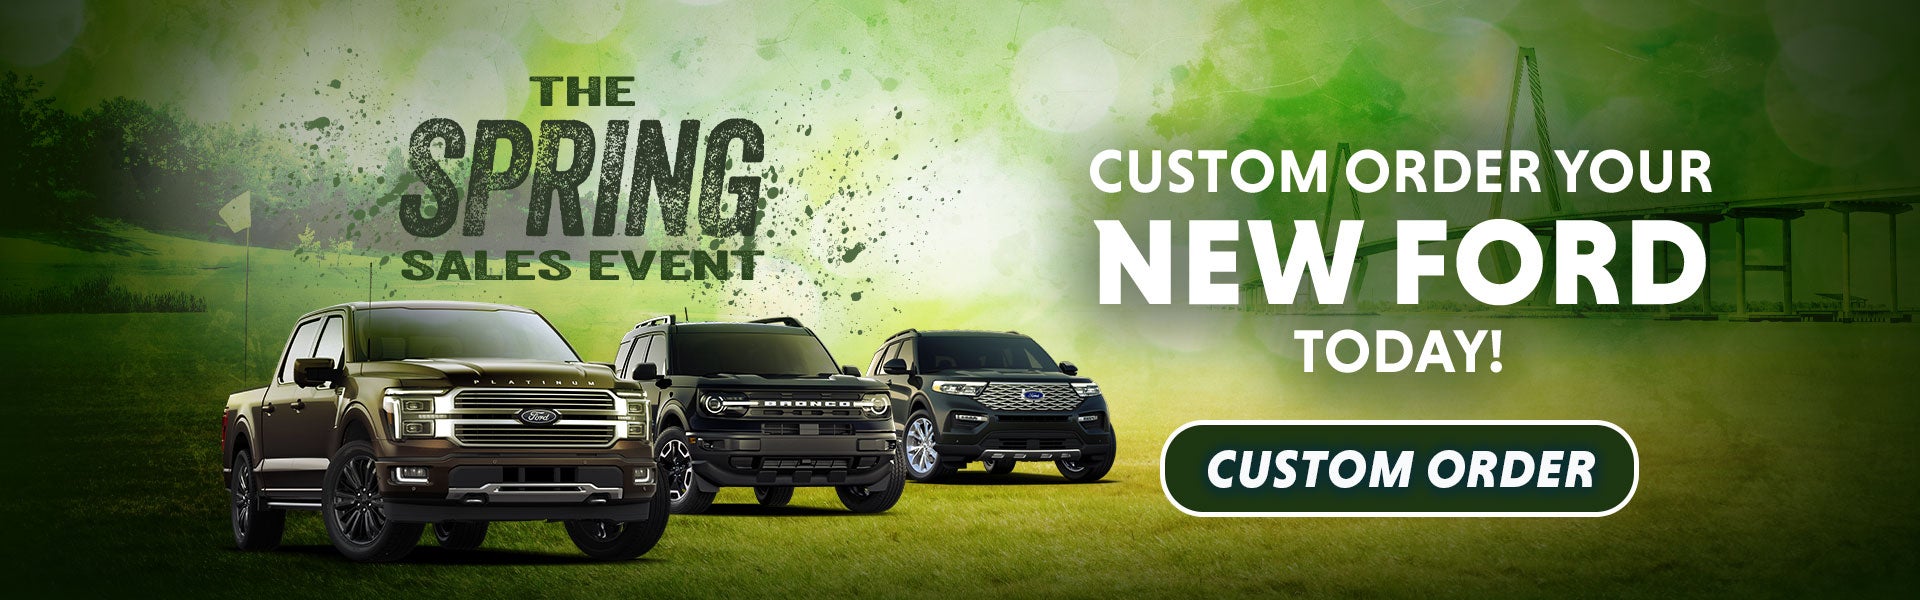 Custom Order Your New Ford Today!